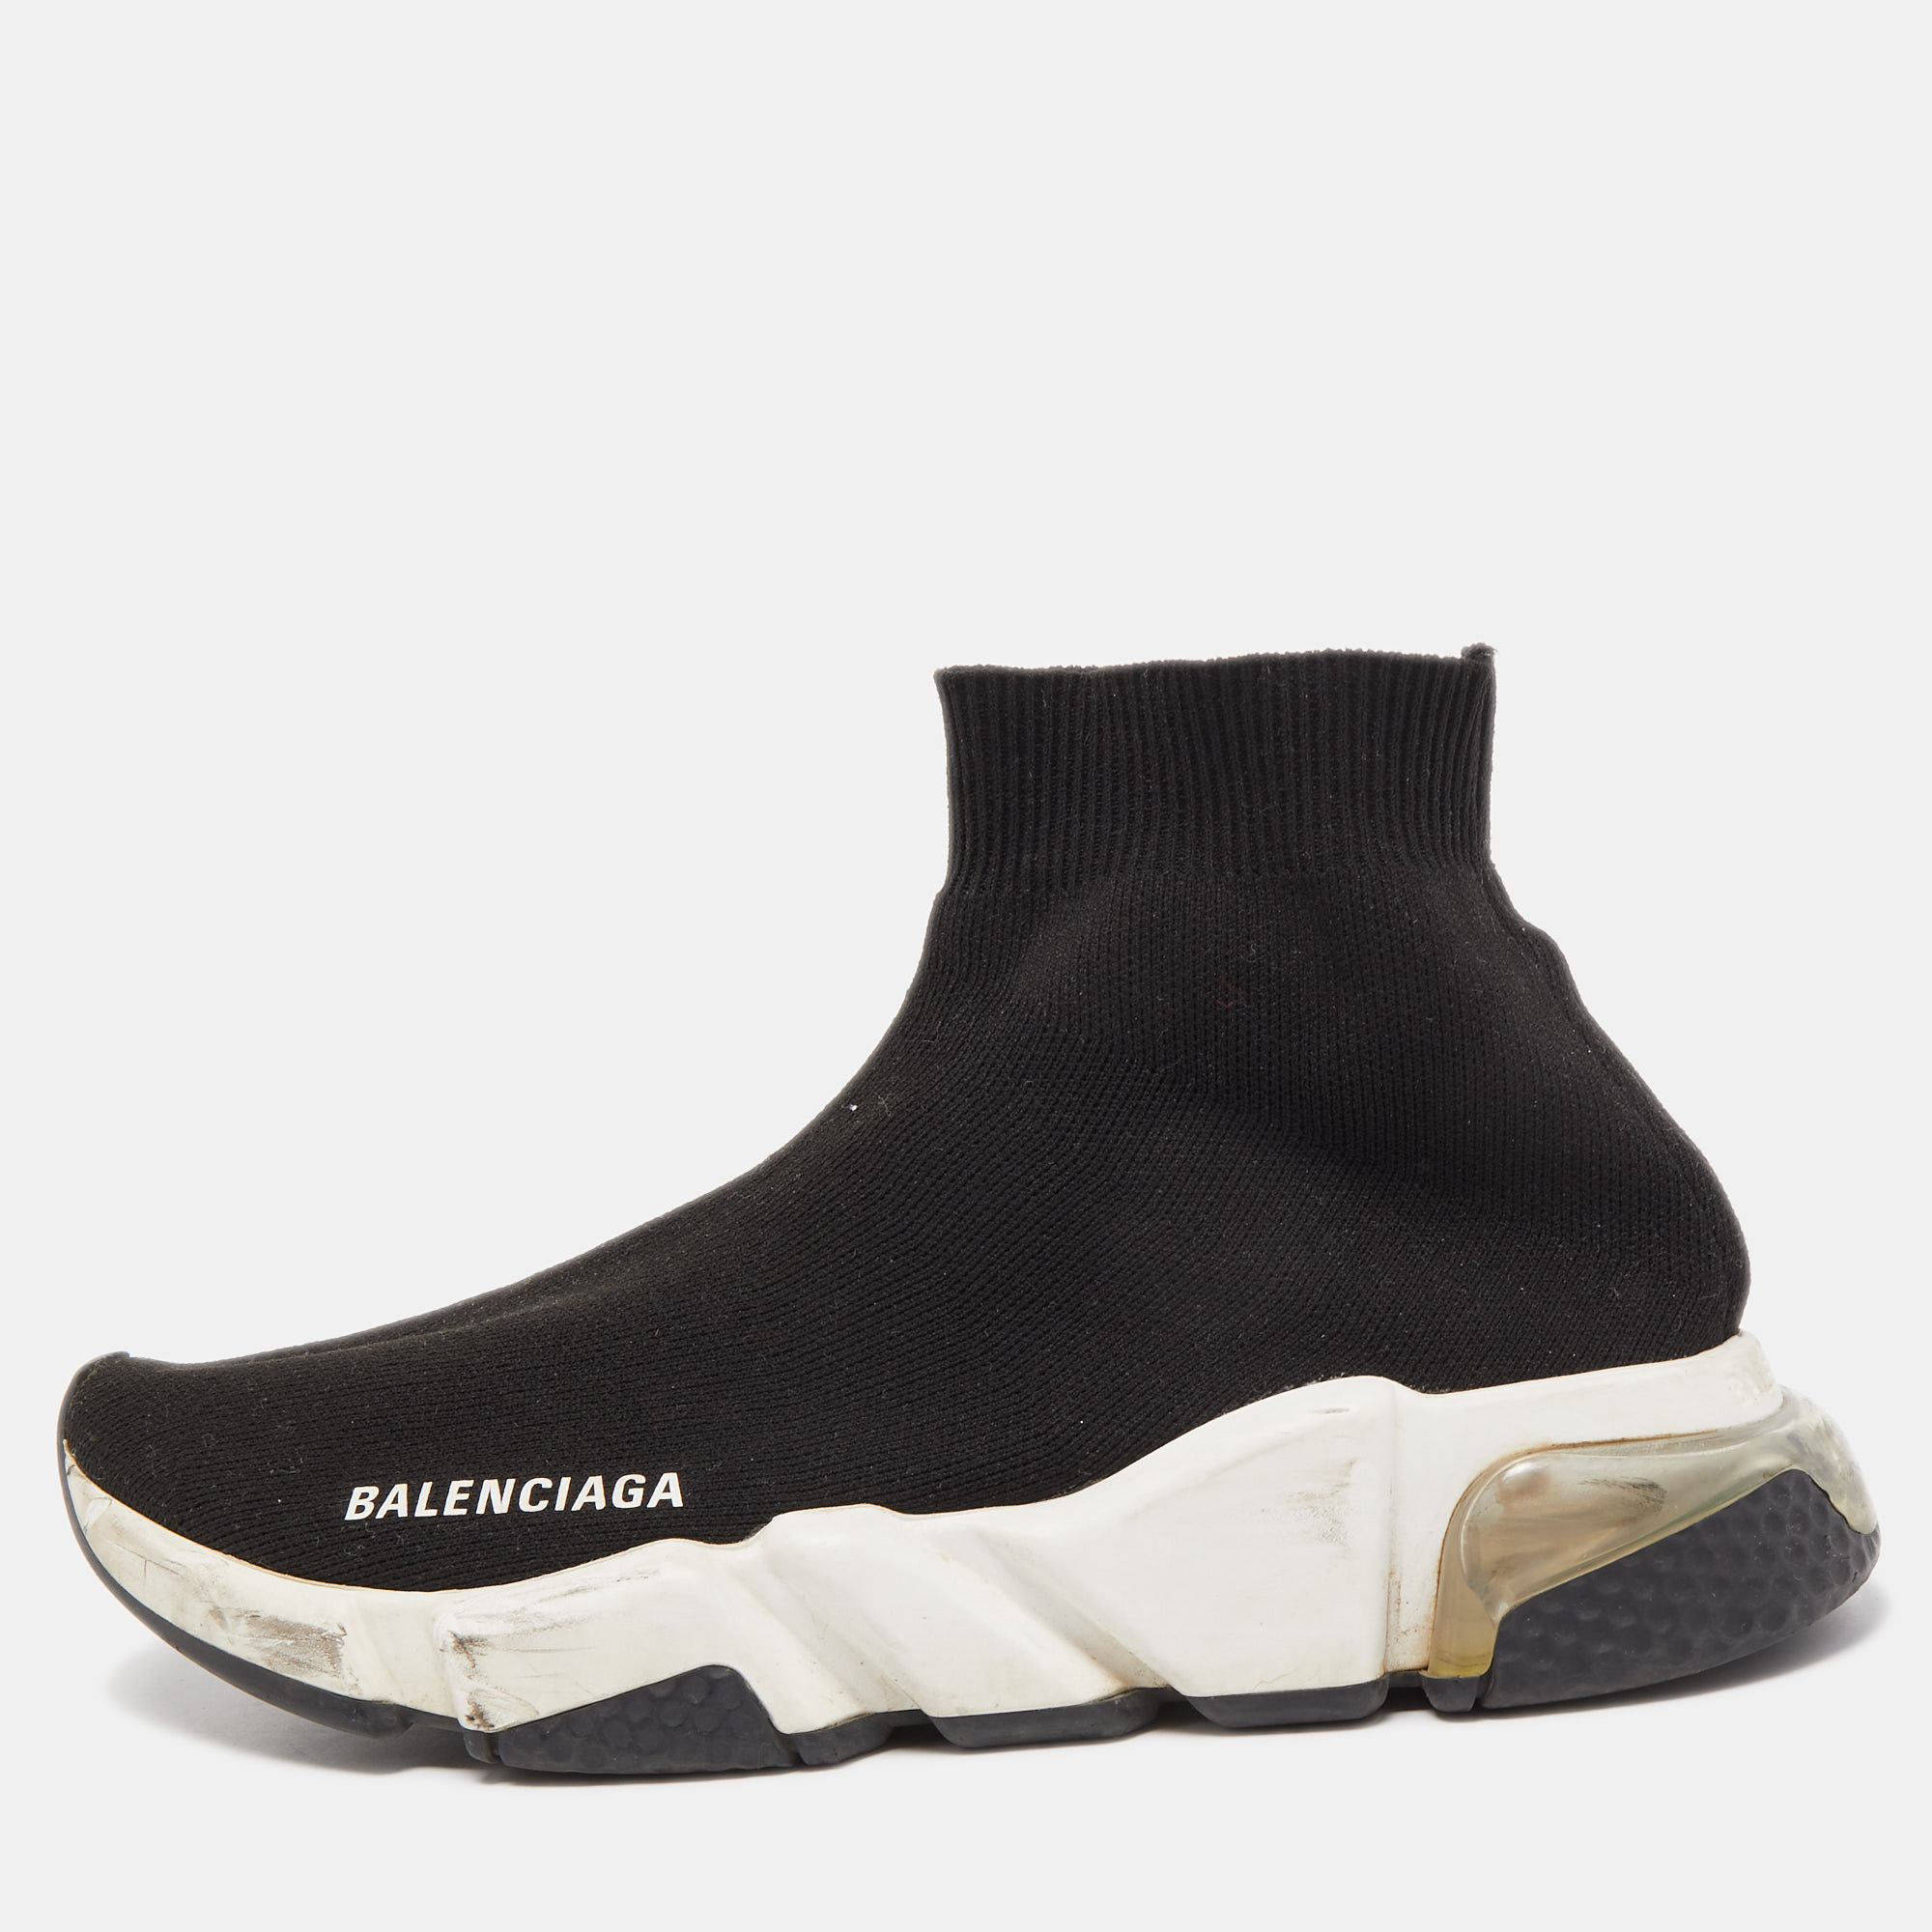 

Balenciaga Black Knit Fabric Speed Trainer Slip On Sneakers Size